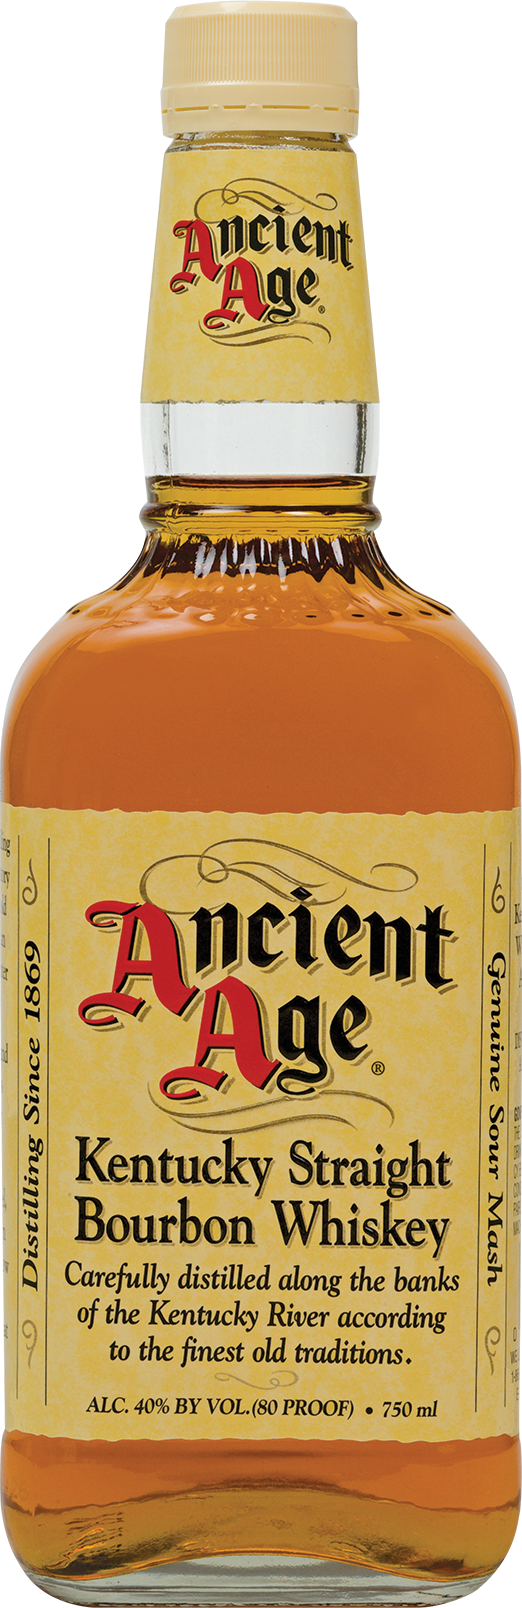 Ancient Age KY Straight Bourbon